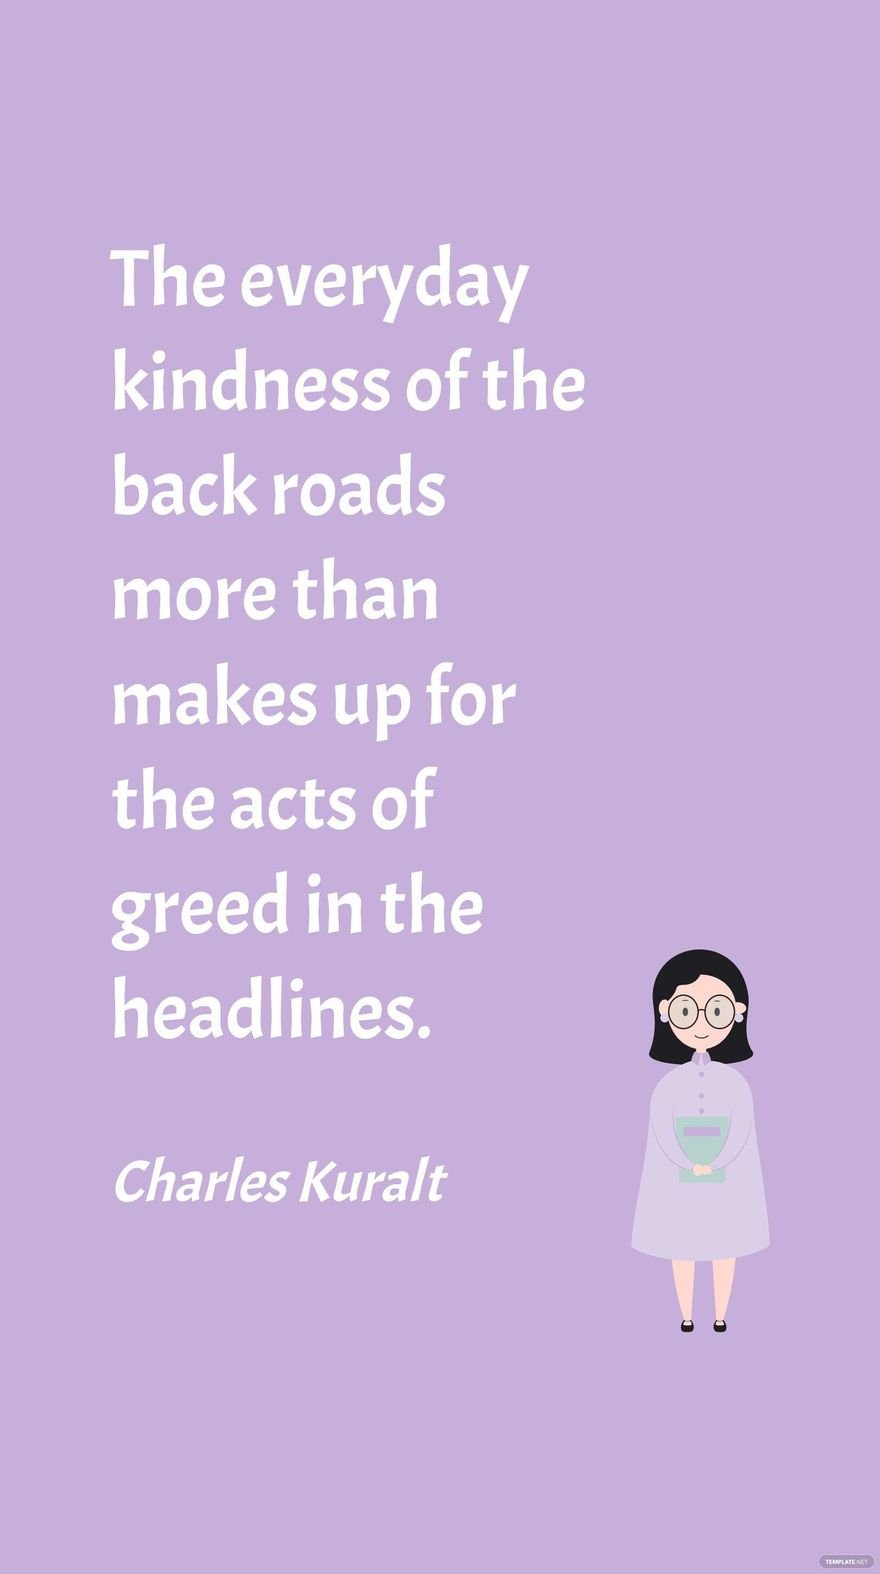 Charles Kuralt - The everyday kindness of the back roads more than makes up for the acts of greed in the headlines.